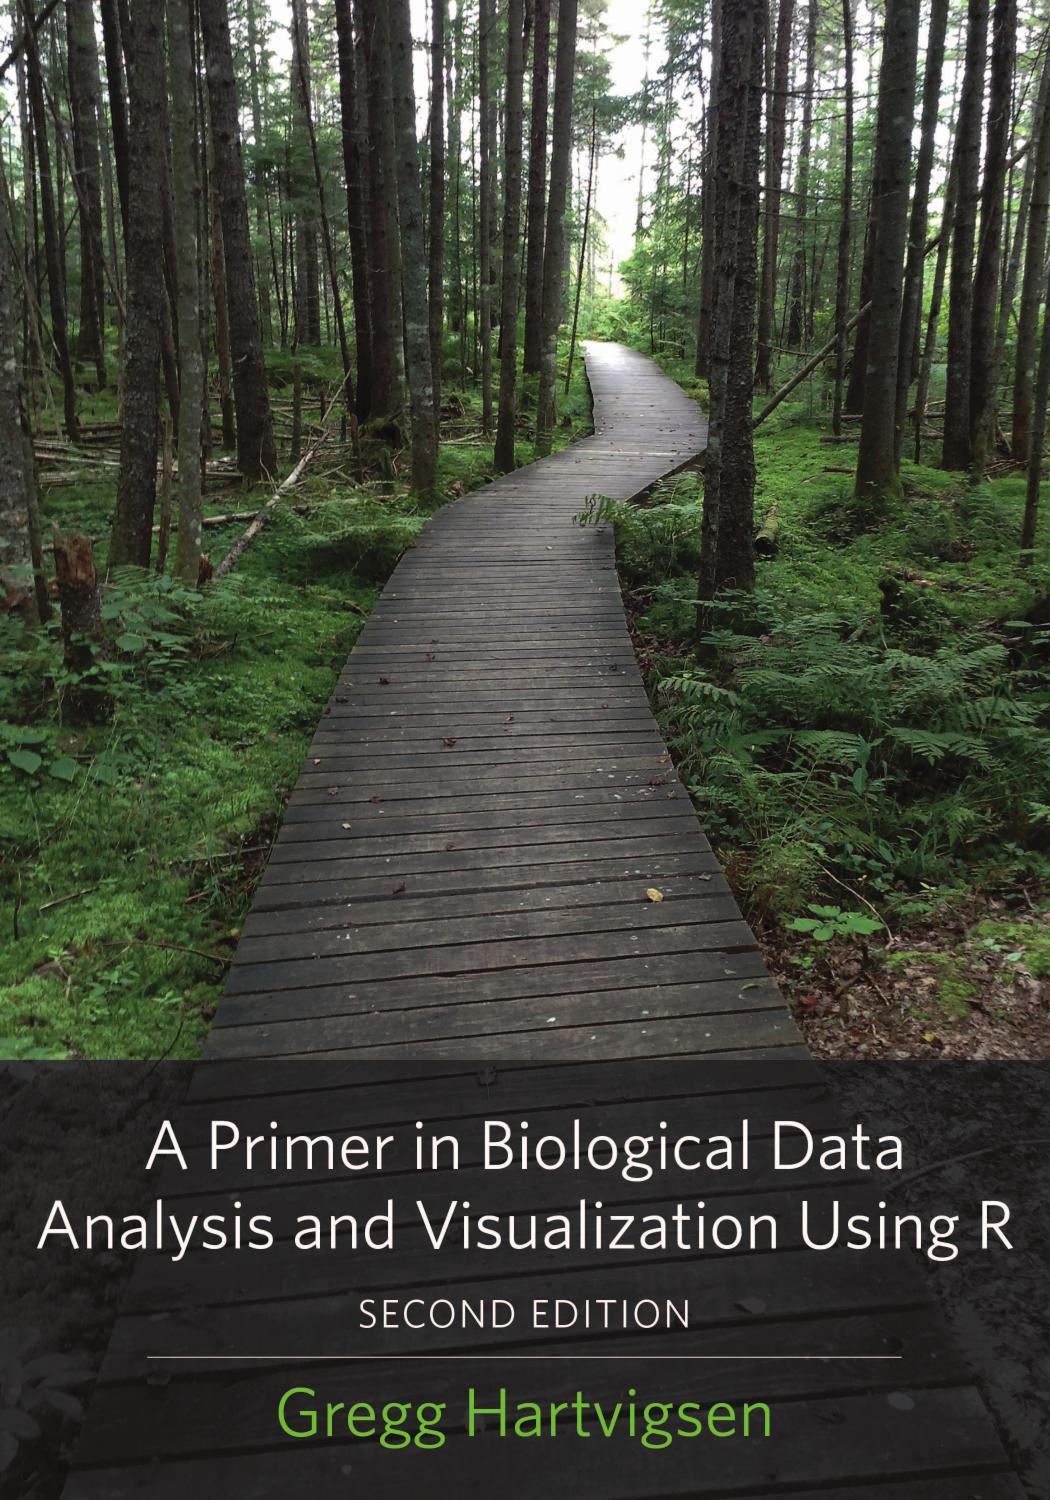 A Primer in Biological Data Analysis and Visualization Using R by Gregg Hartvigsen